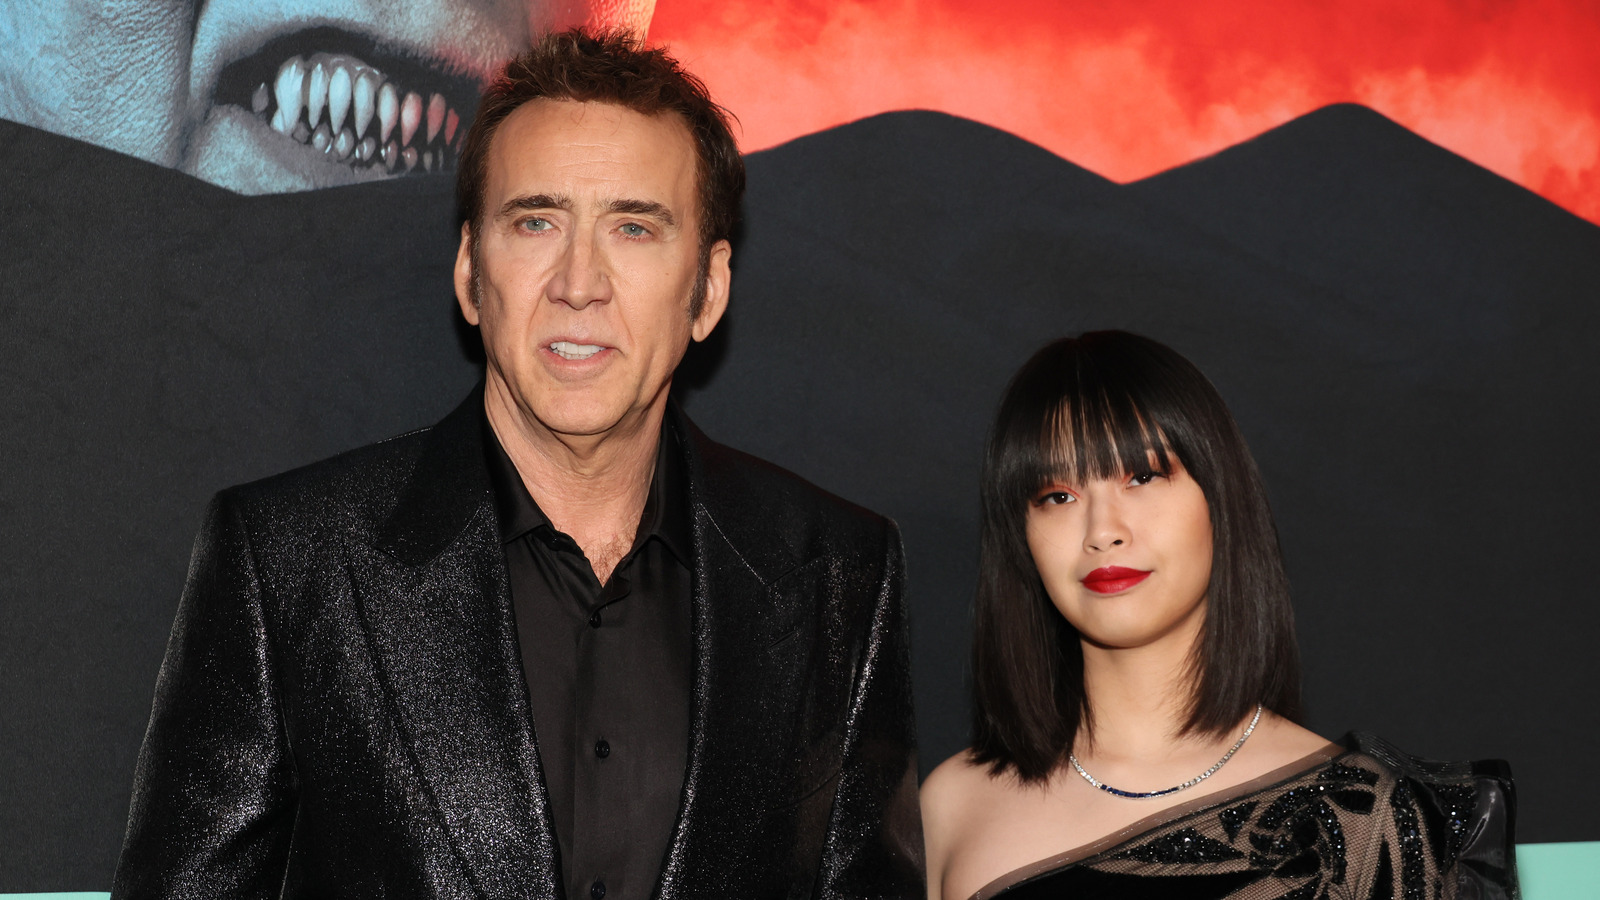 The Way Nicolas Cage Proposed To His Wife Riko Shibata Was Anything But ...